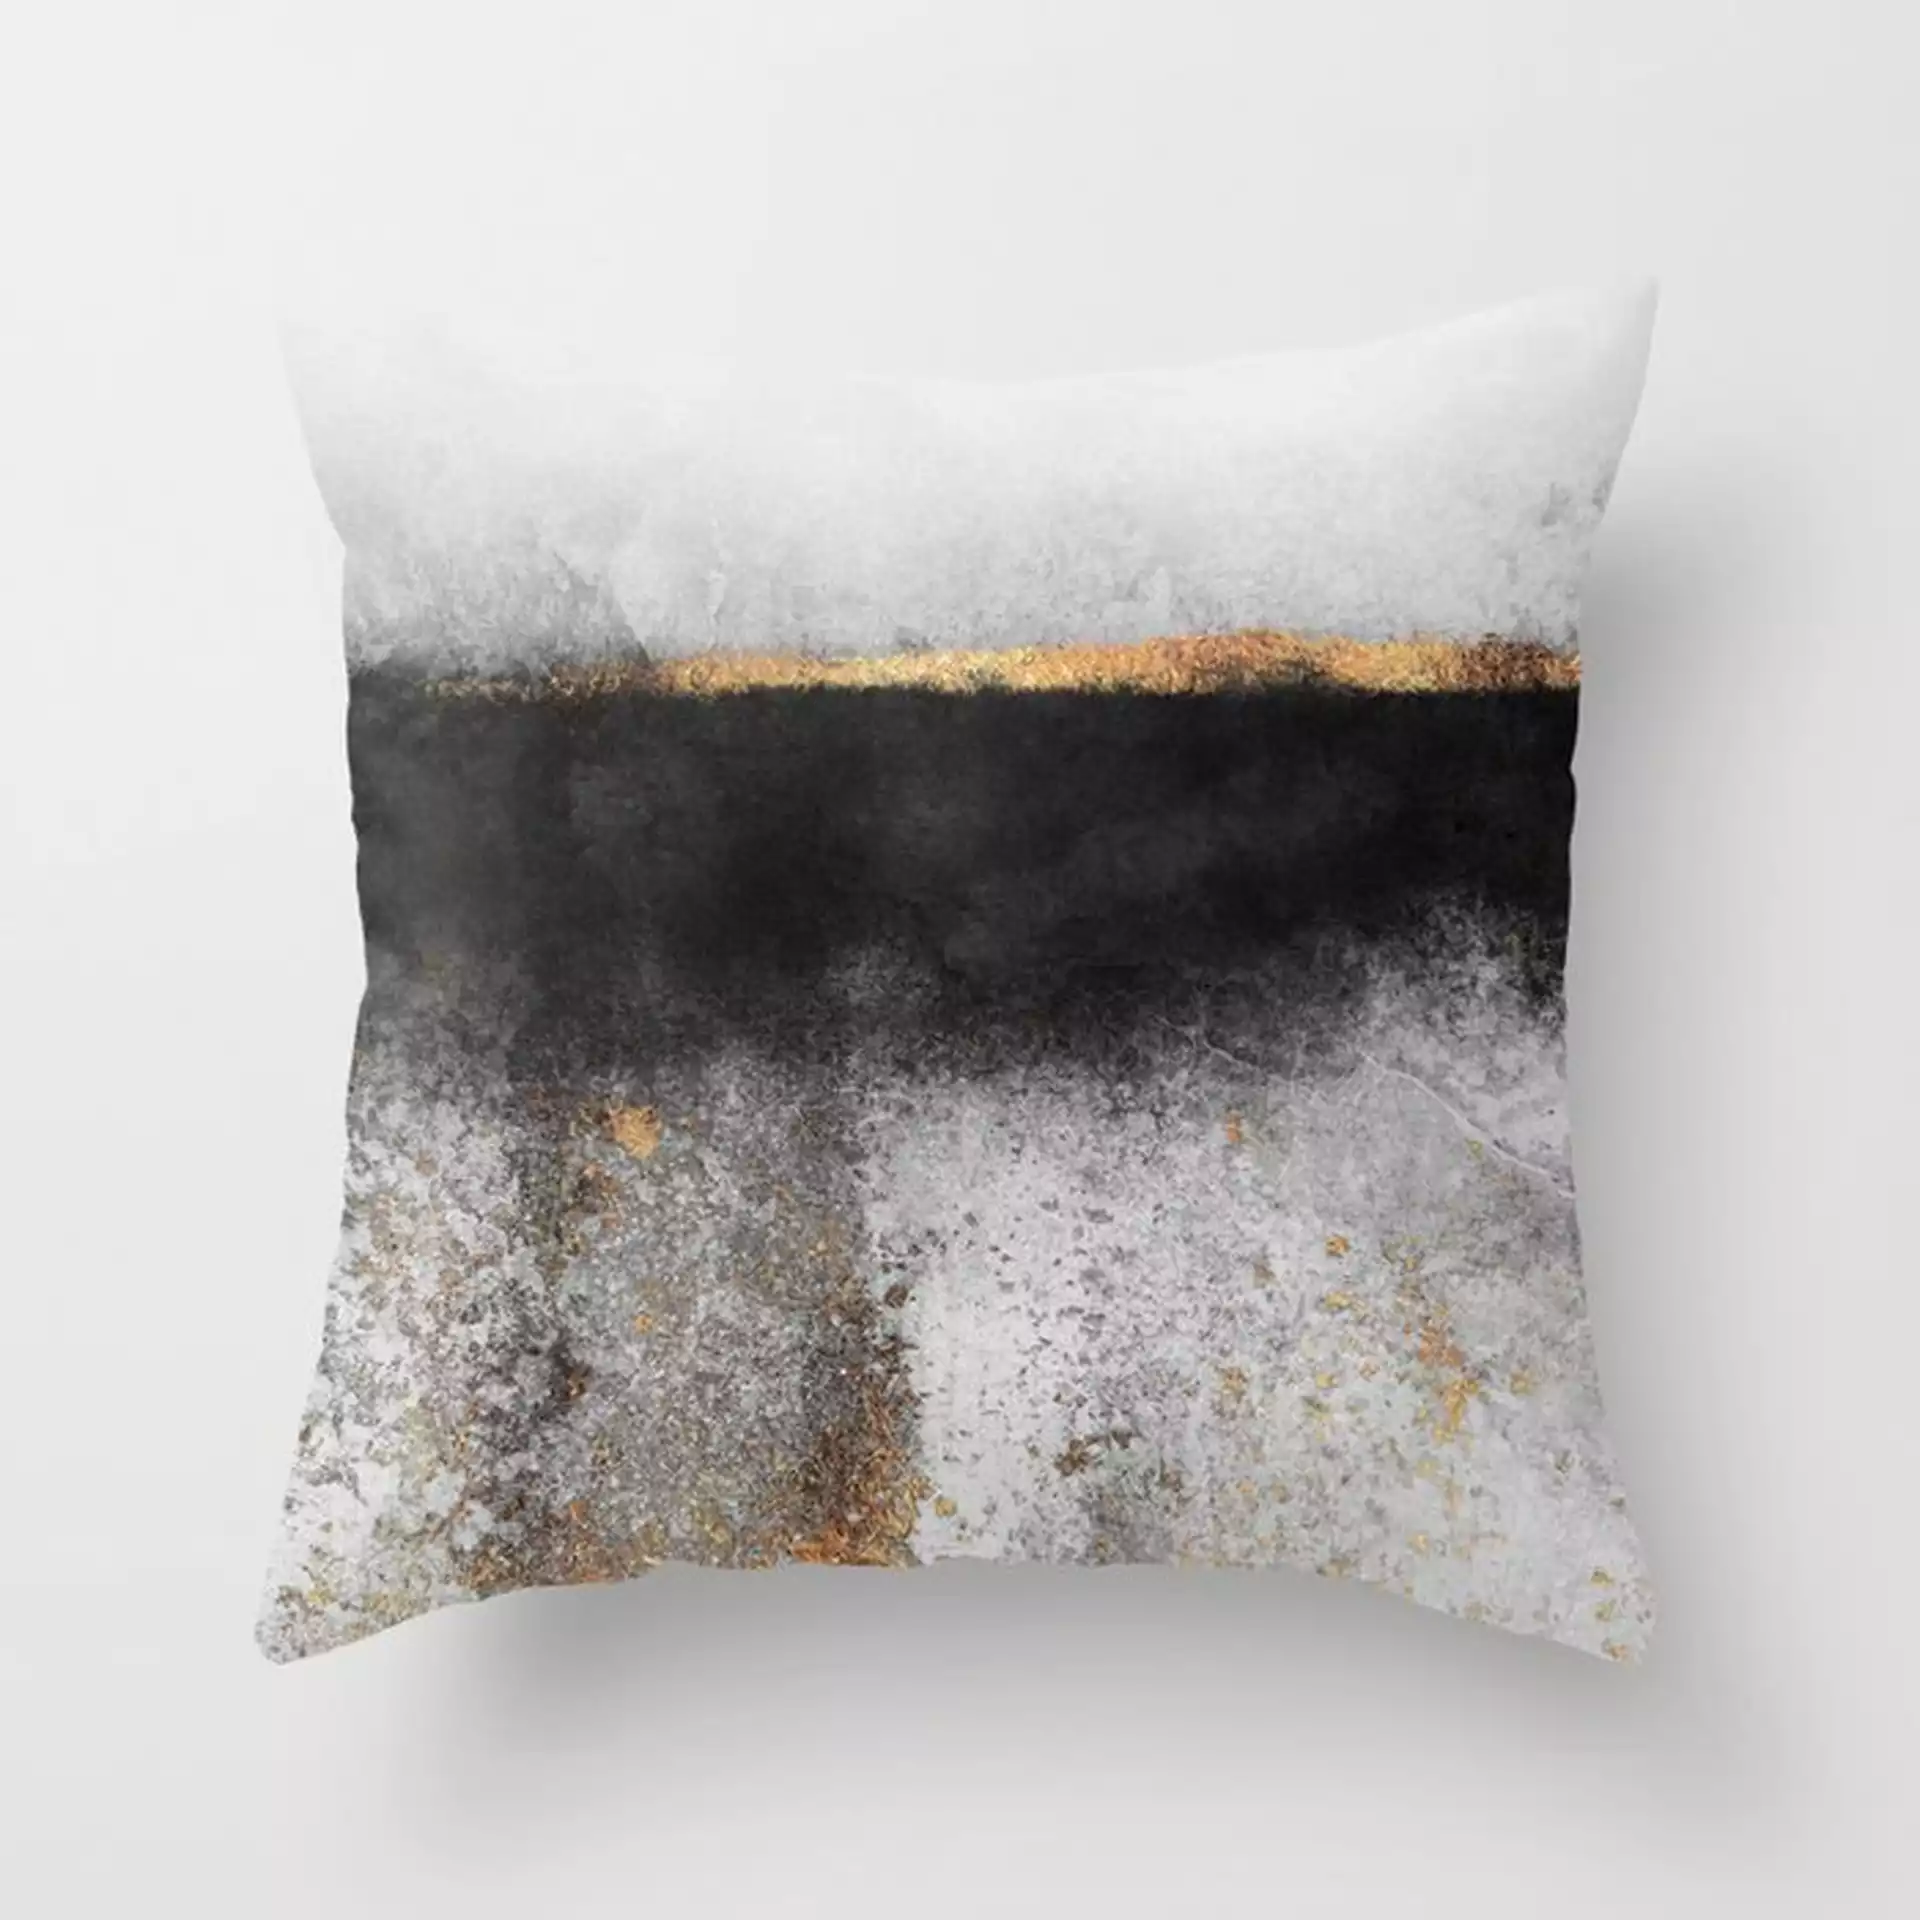 Soot And Gold Couch Throw Pillow by Elisabeth Fredriksson - Cover (18" x 18") with pillow insert - Outdoor Pillow